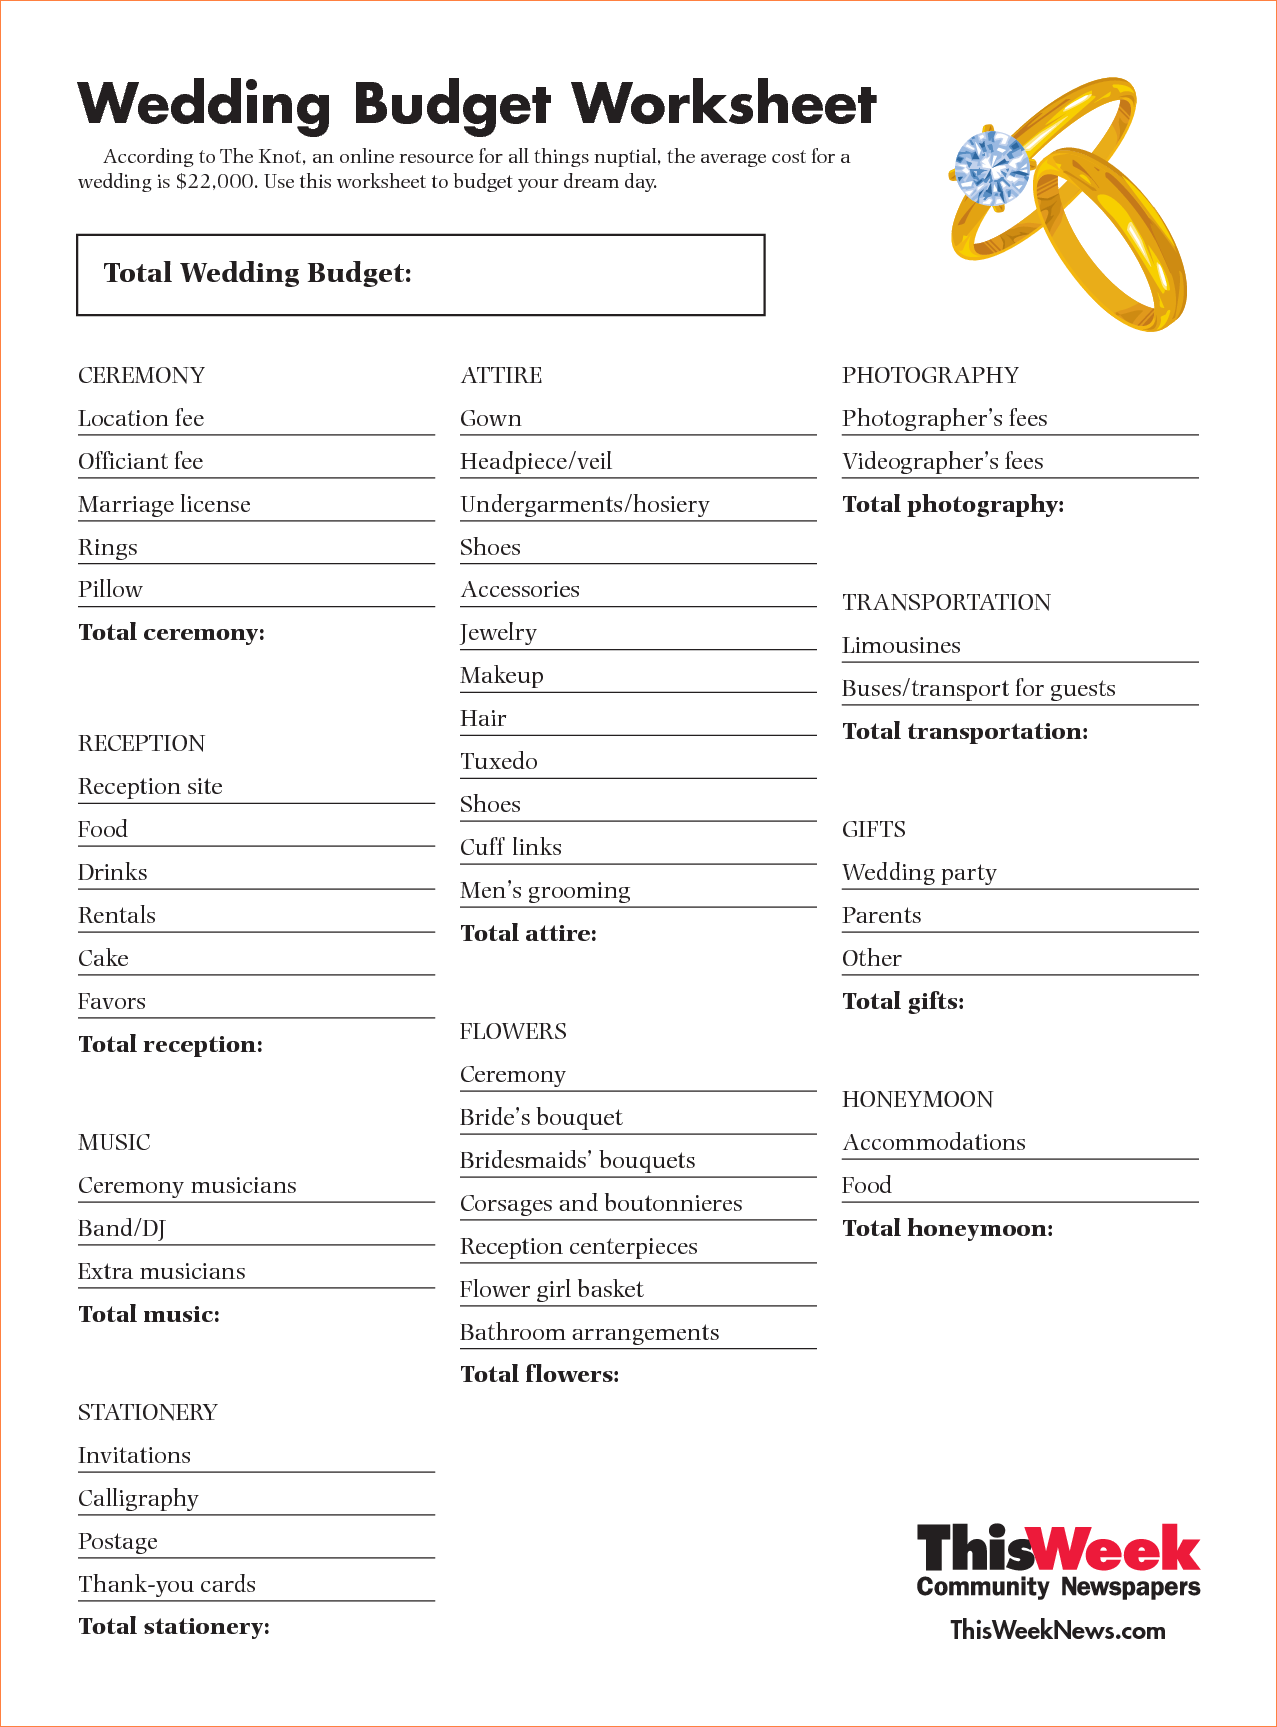 Letter Of The Knot Wedding Budget Spreadsheet Inside The Knot Wedding Budget Spreadsheet Letters